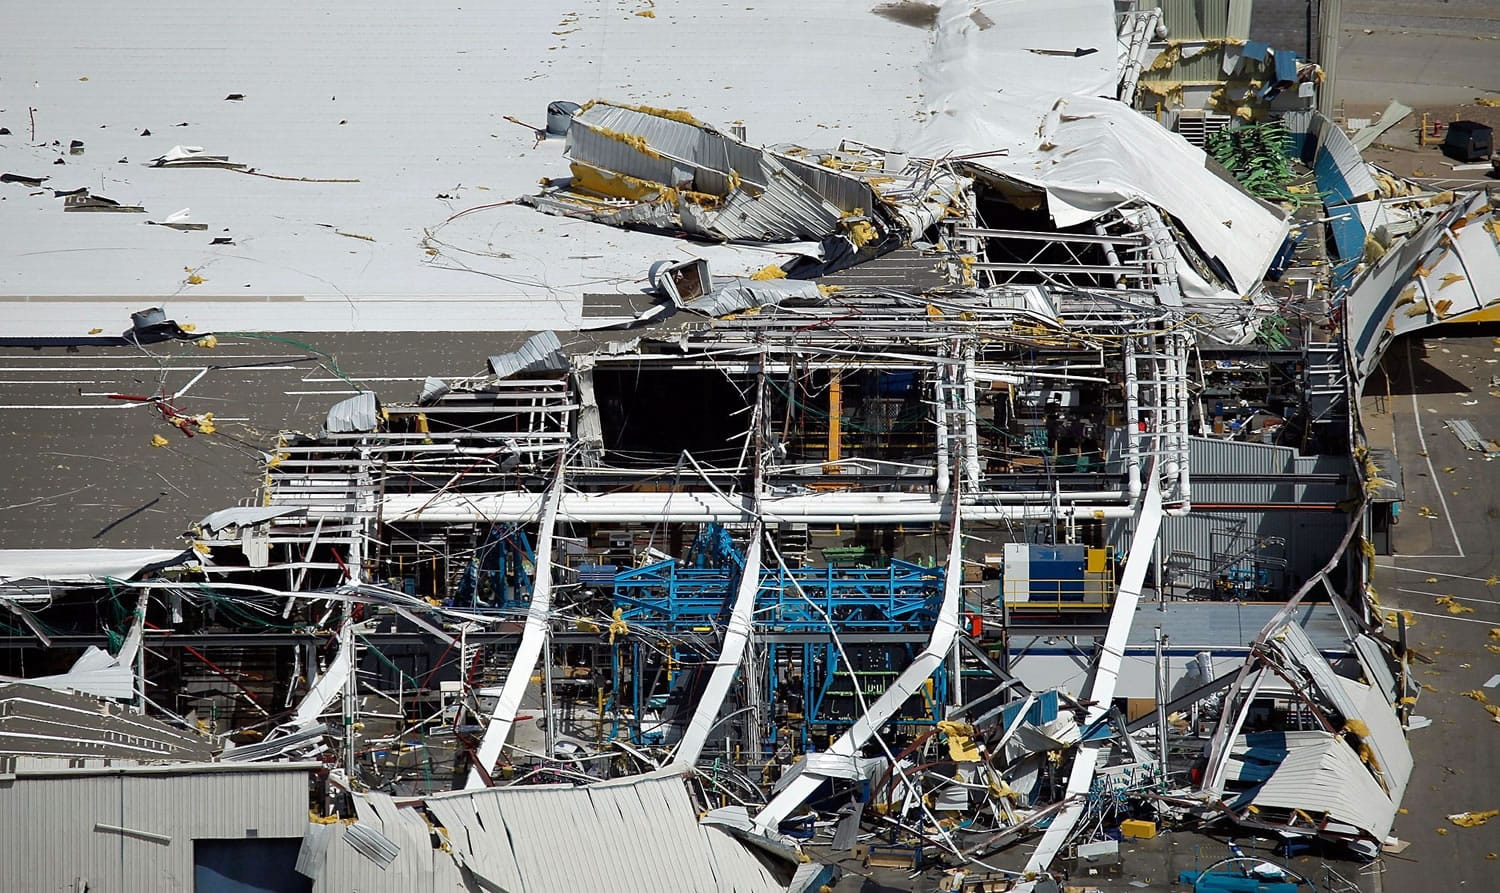 Damage is evident Sunday at Boeing and Spirit AeroSystems in Wichita, Kan., after a tornado swept through the area late Saturday.